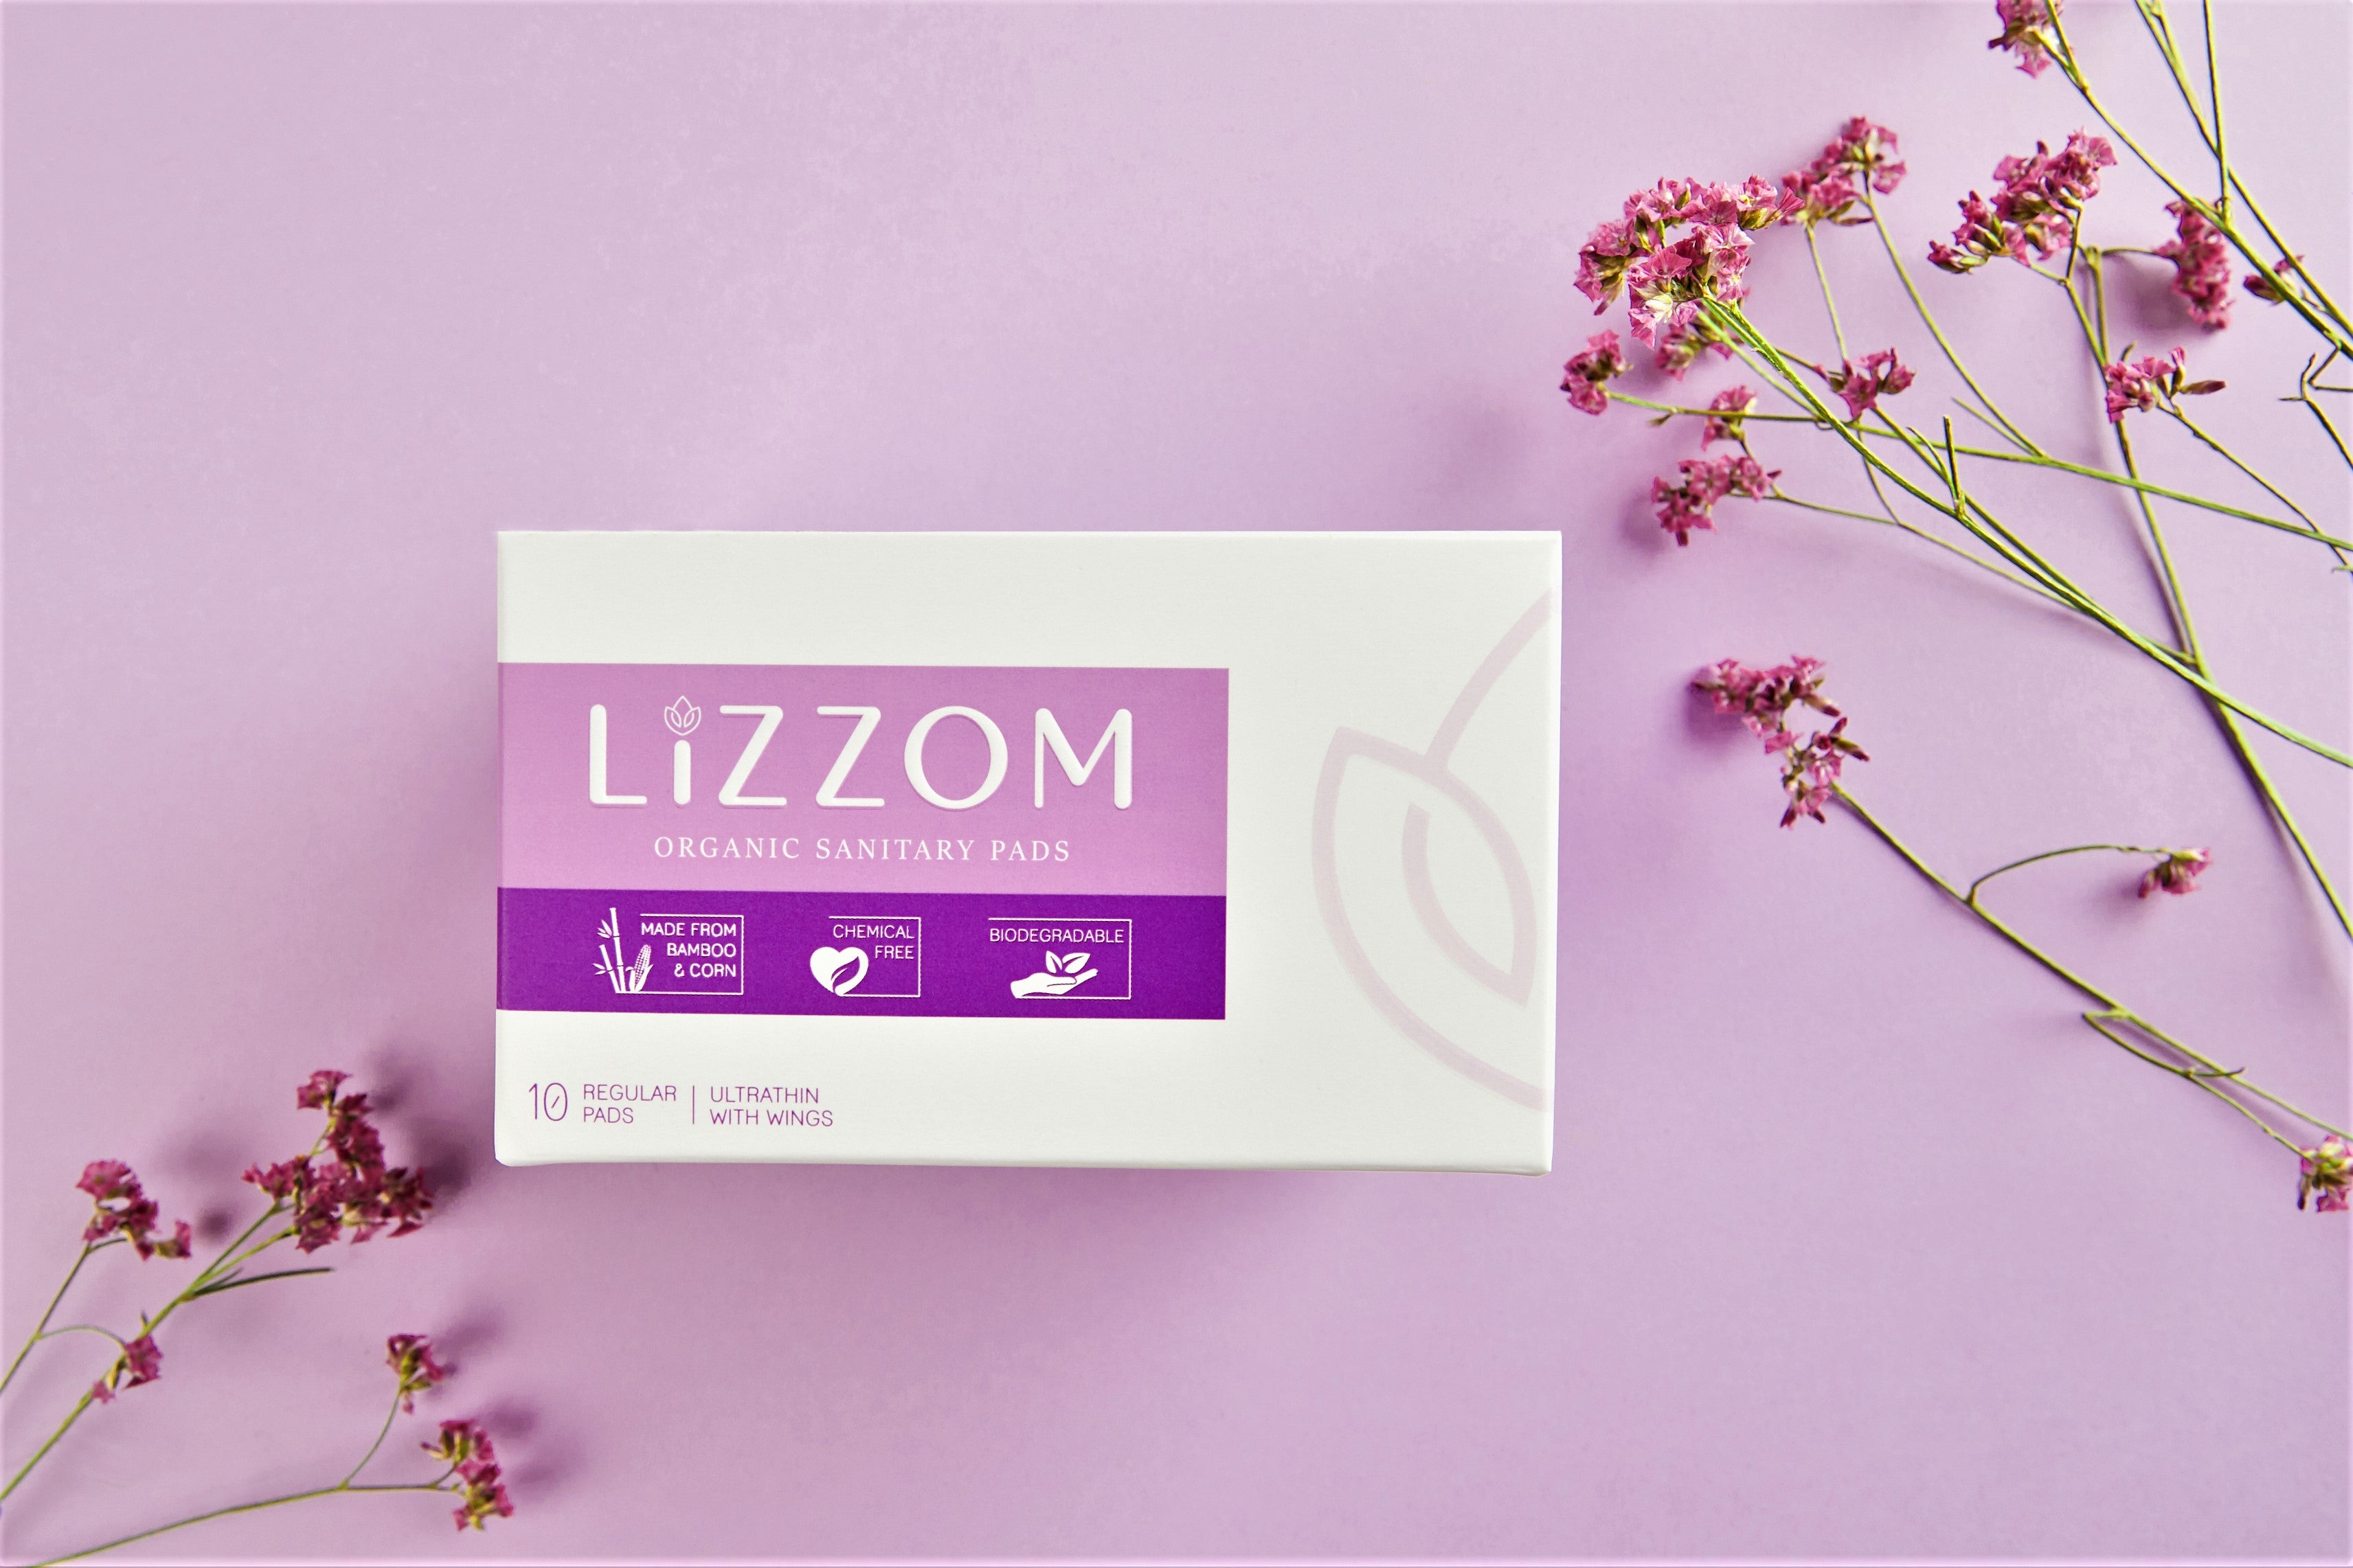 LiZZOM Mini Monthly Bundle (A combination of 1 pack your choosen size of pads + 1 pack of your favourite daily liners)